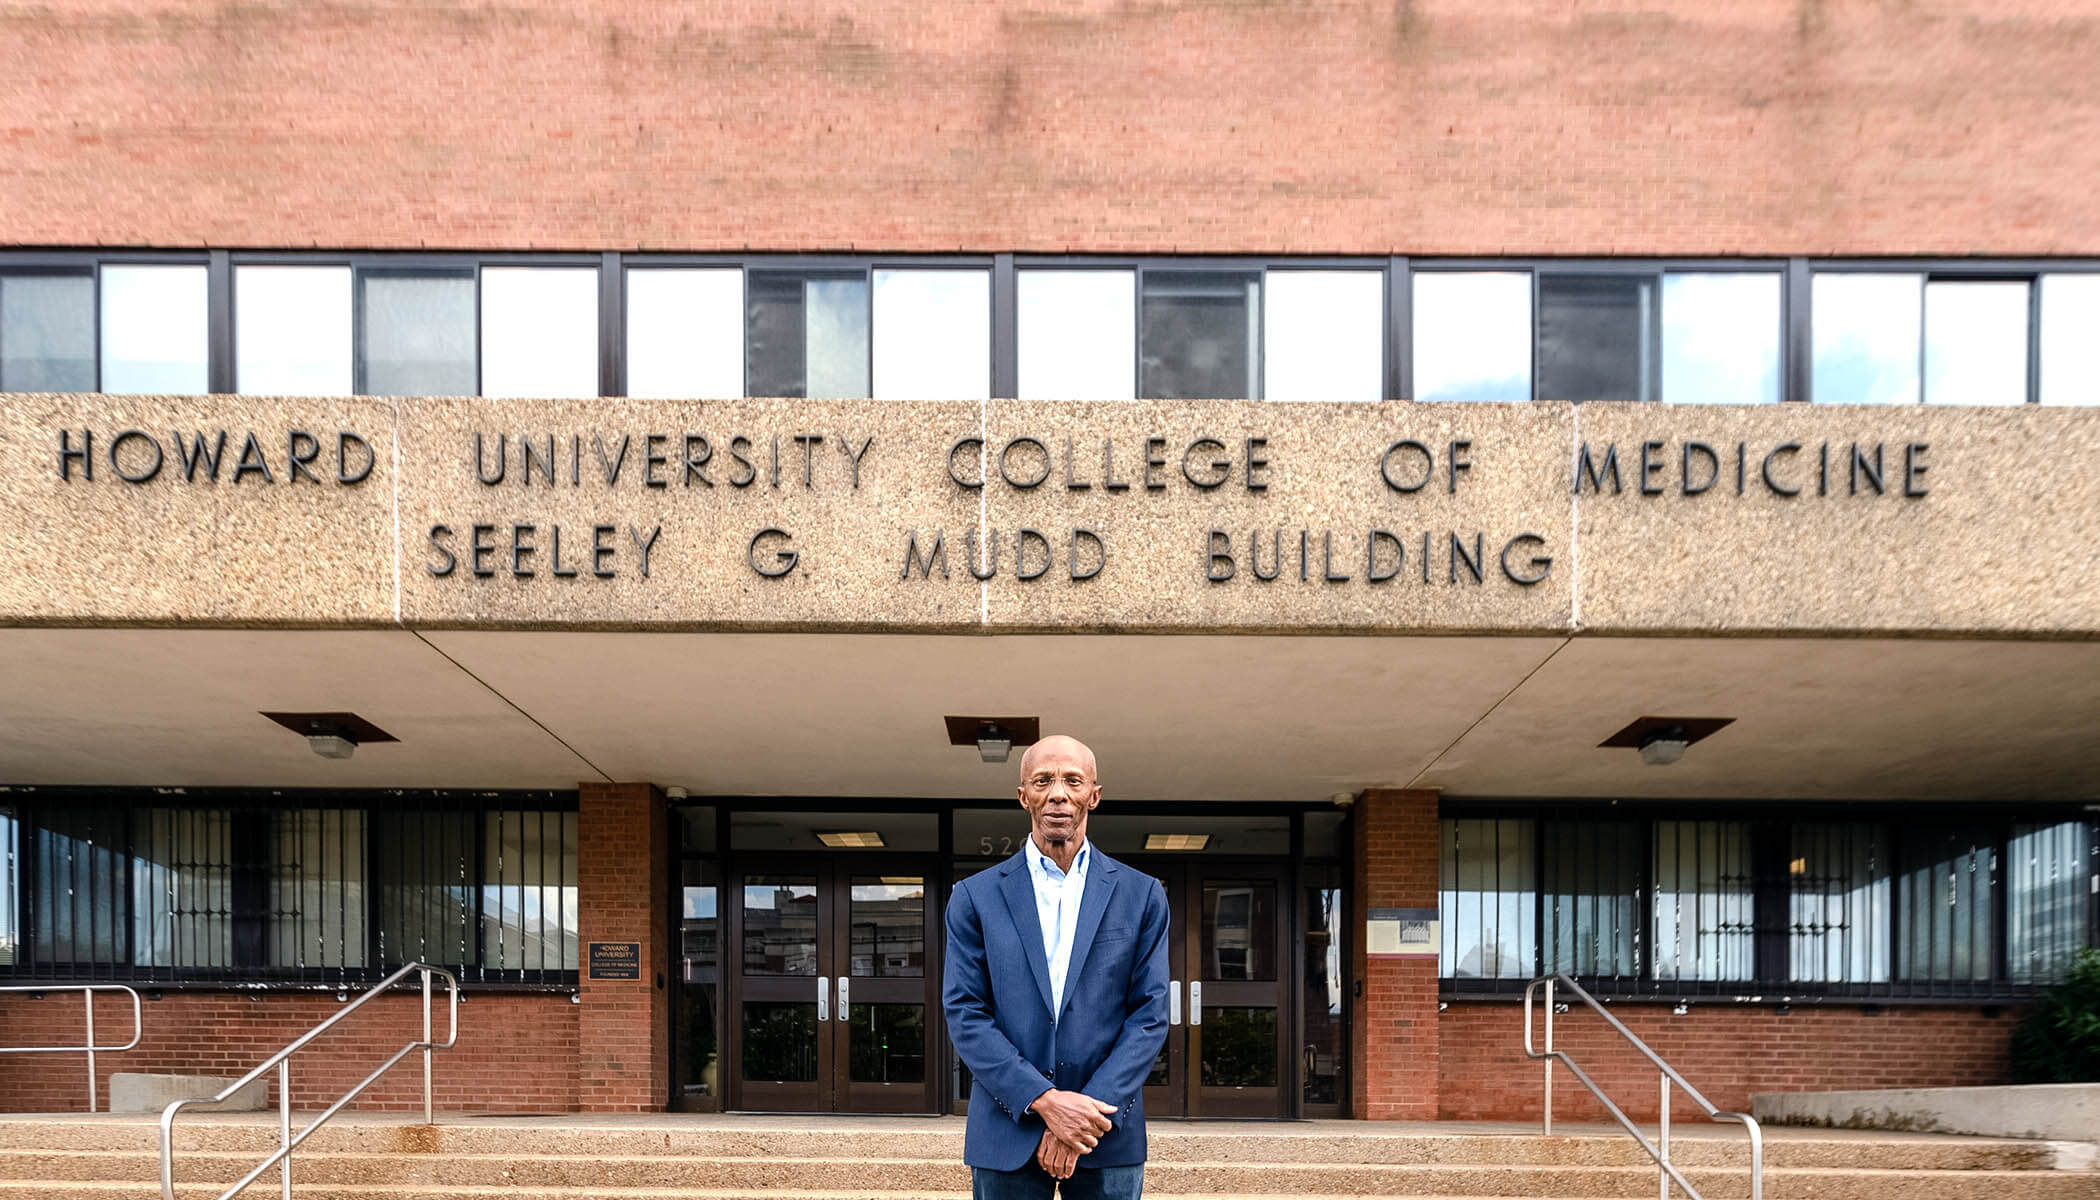 A man stands in front of a campus building that reads “Howard University College of Medicine Seeley G. Mudd Building.”